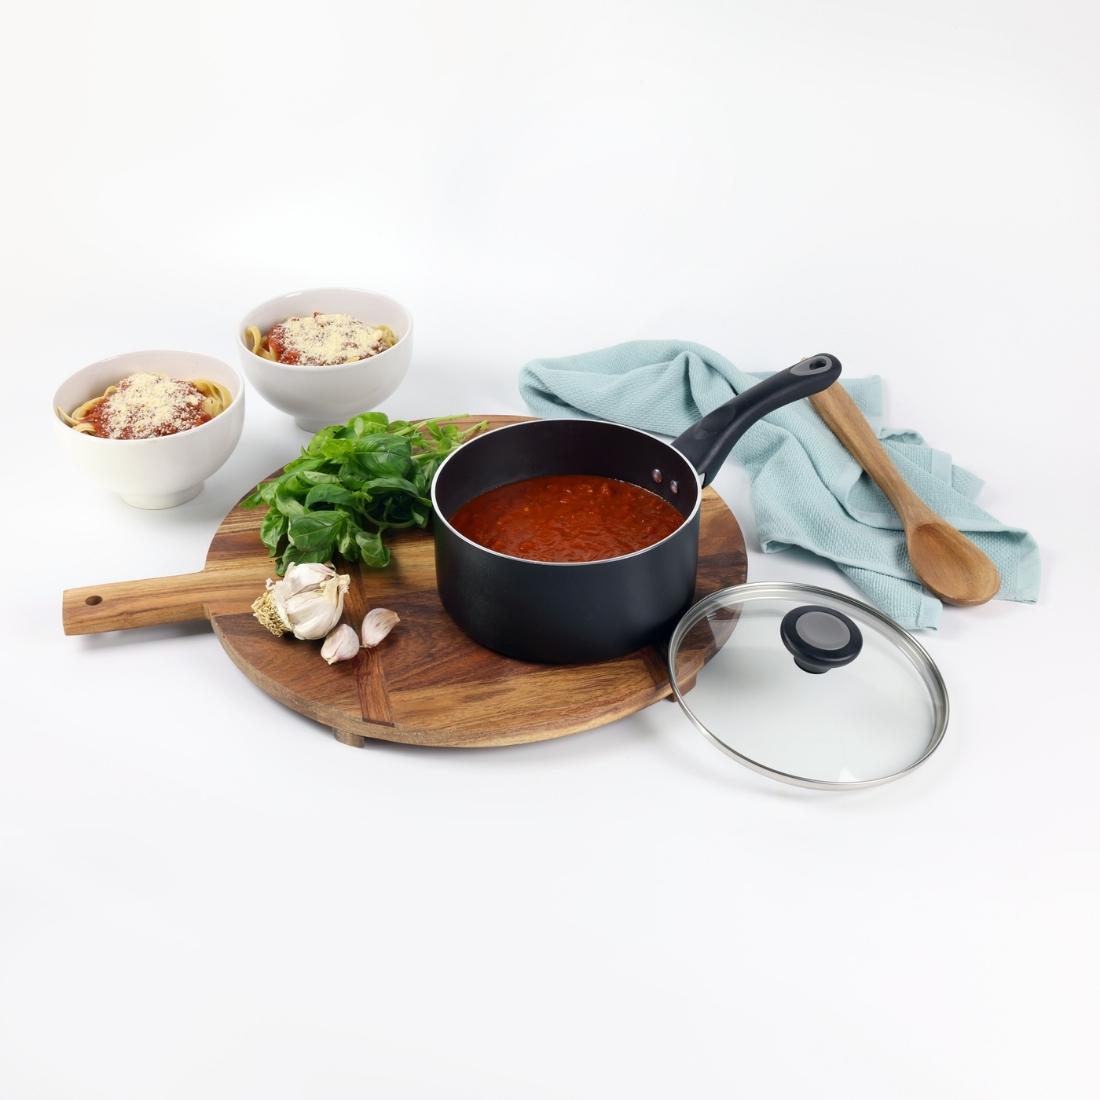 RACO Complete Nonstick Induction Covered Saucepan 20cm/2.8L